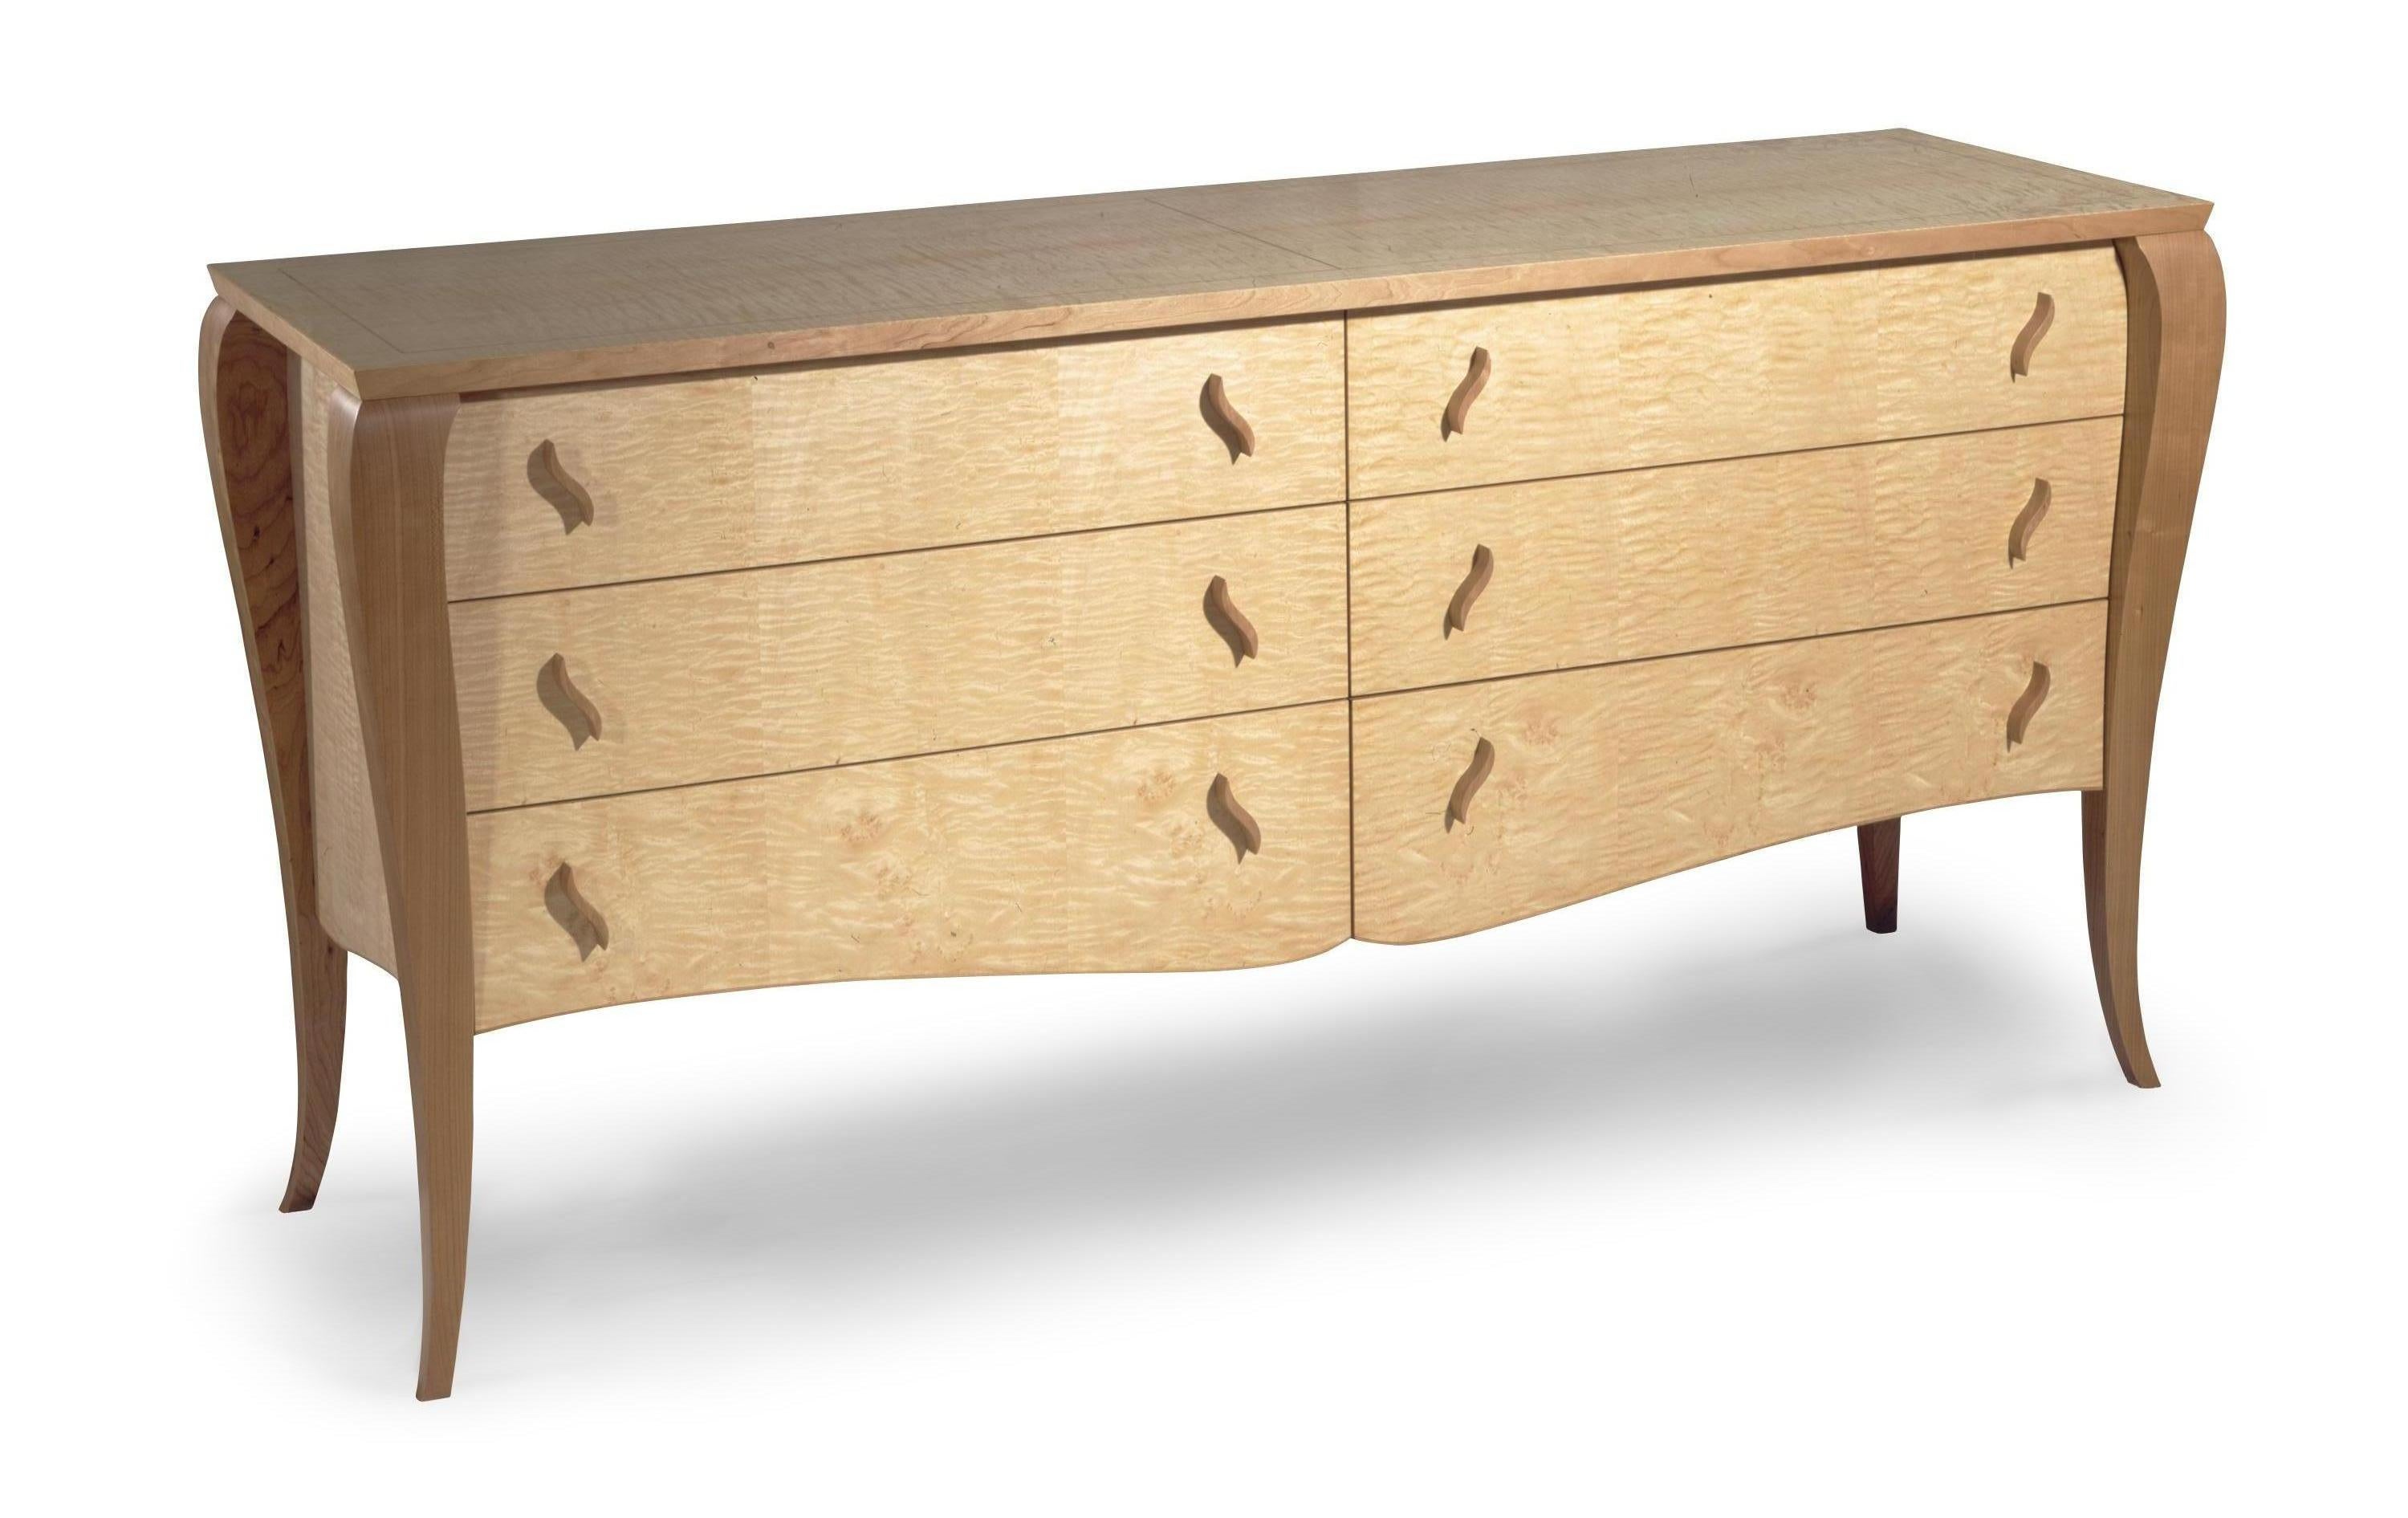 Wood Gazelle Sideboard, Handcrafted Contemporary Credenza with Art Deco Style For Sale